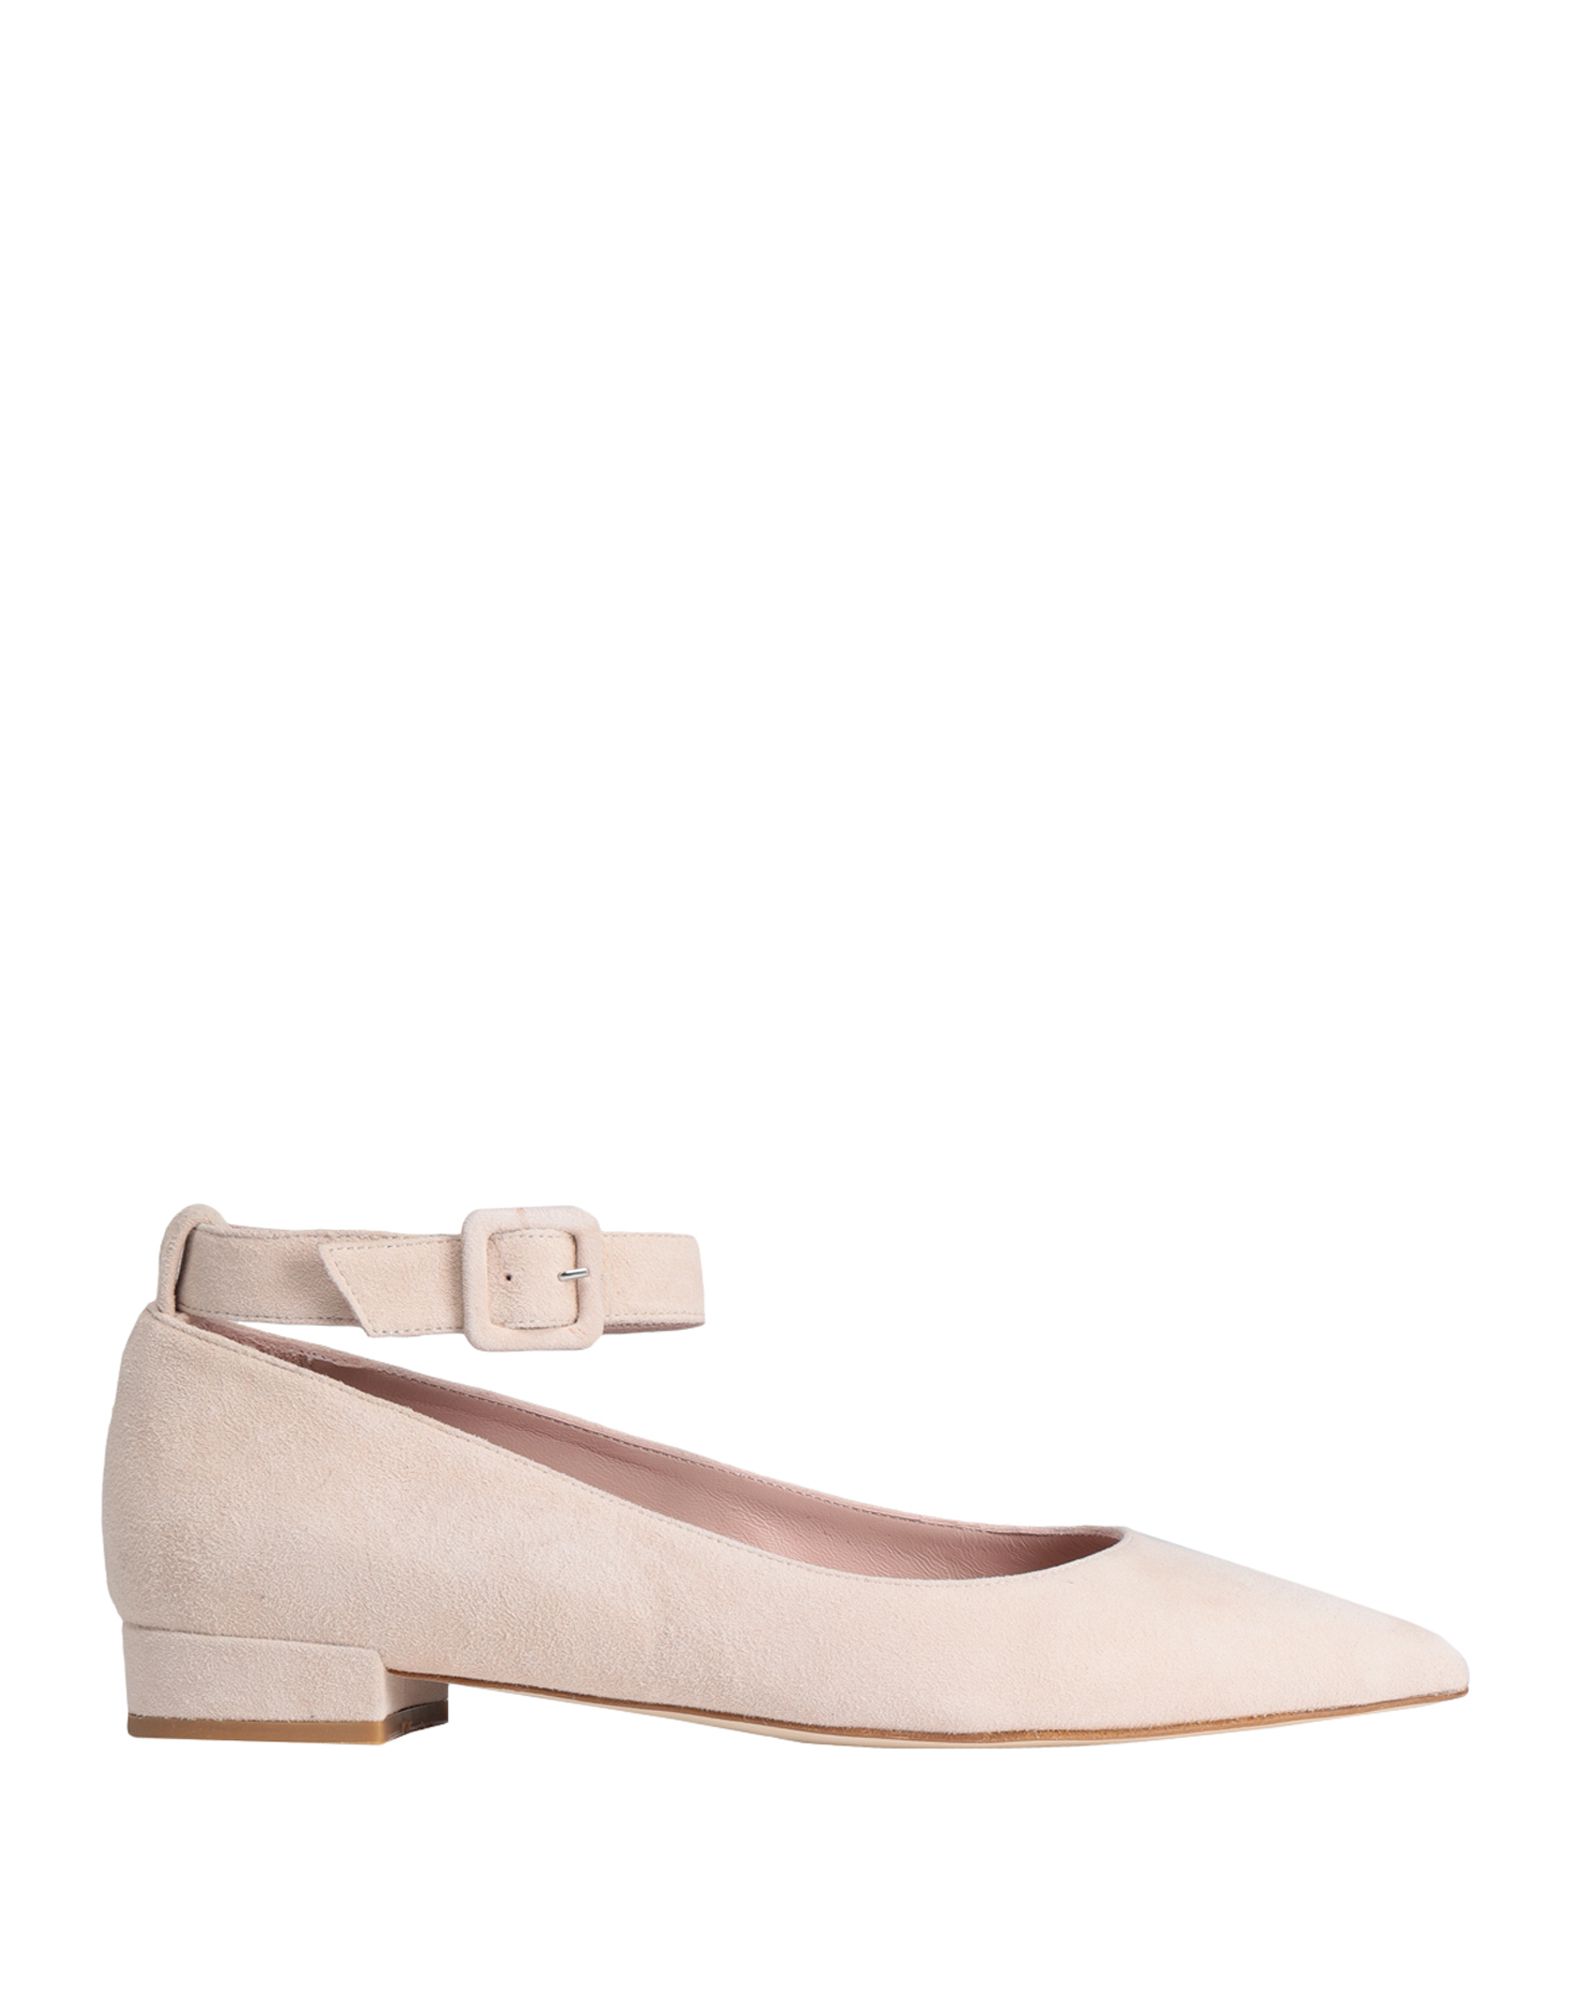 8 by YOOX Ballet flats